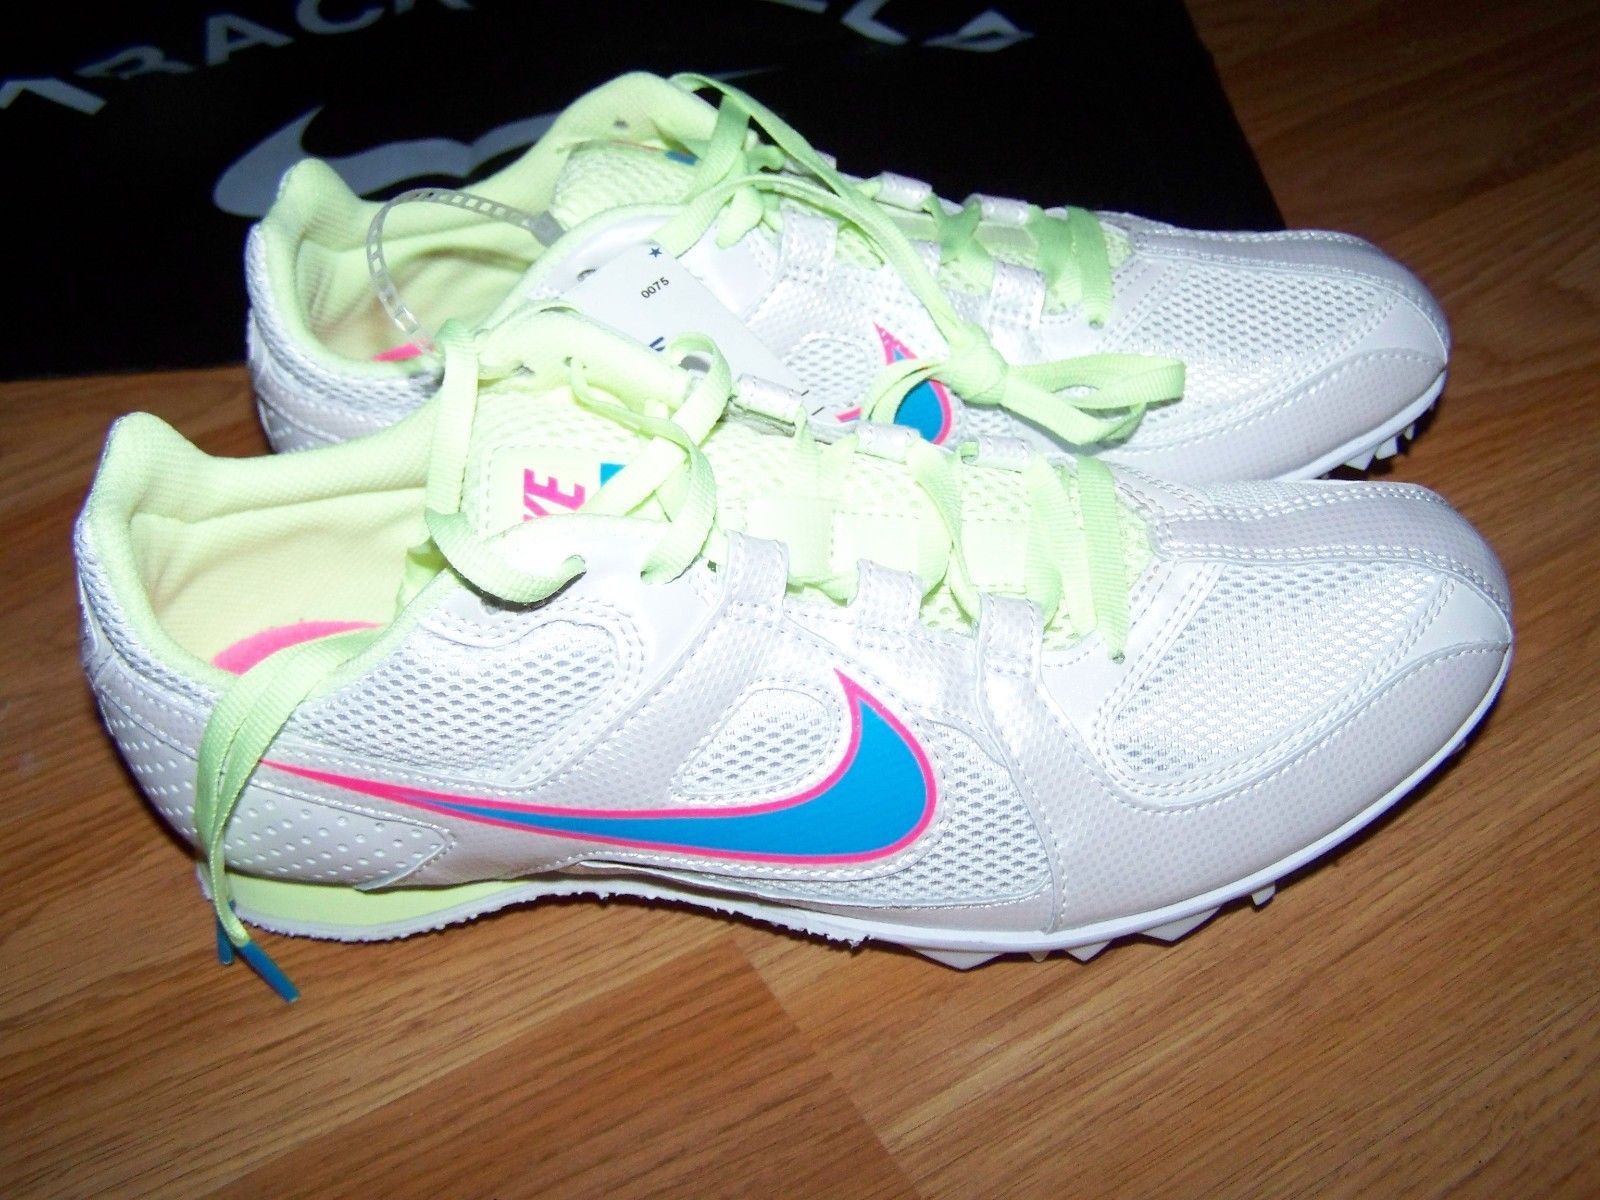 Size 5 Nike Track & Field Rival MD Athletic Shoes White Pink Blue 68650-146  - $40.00